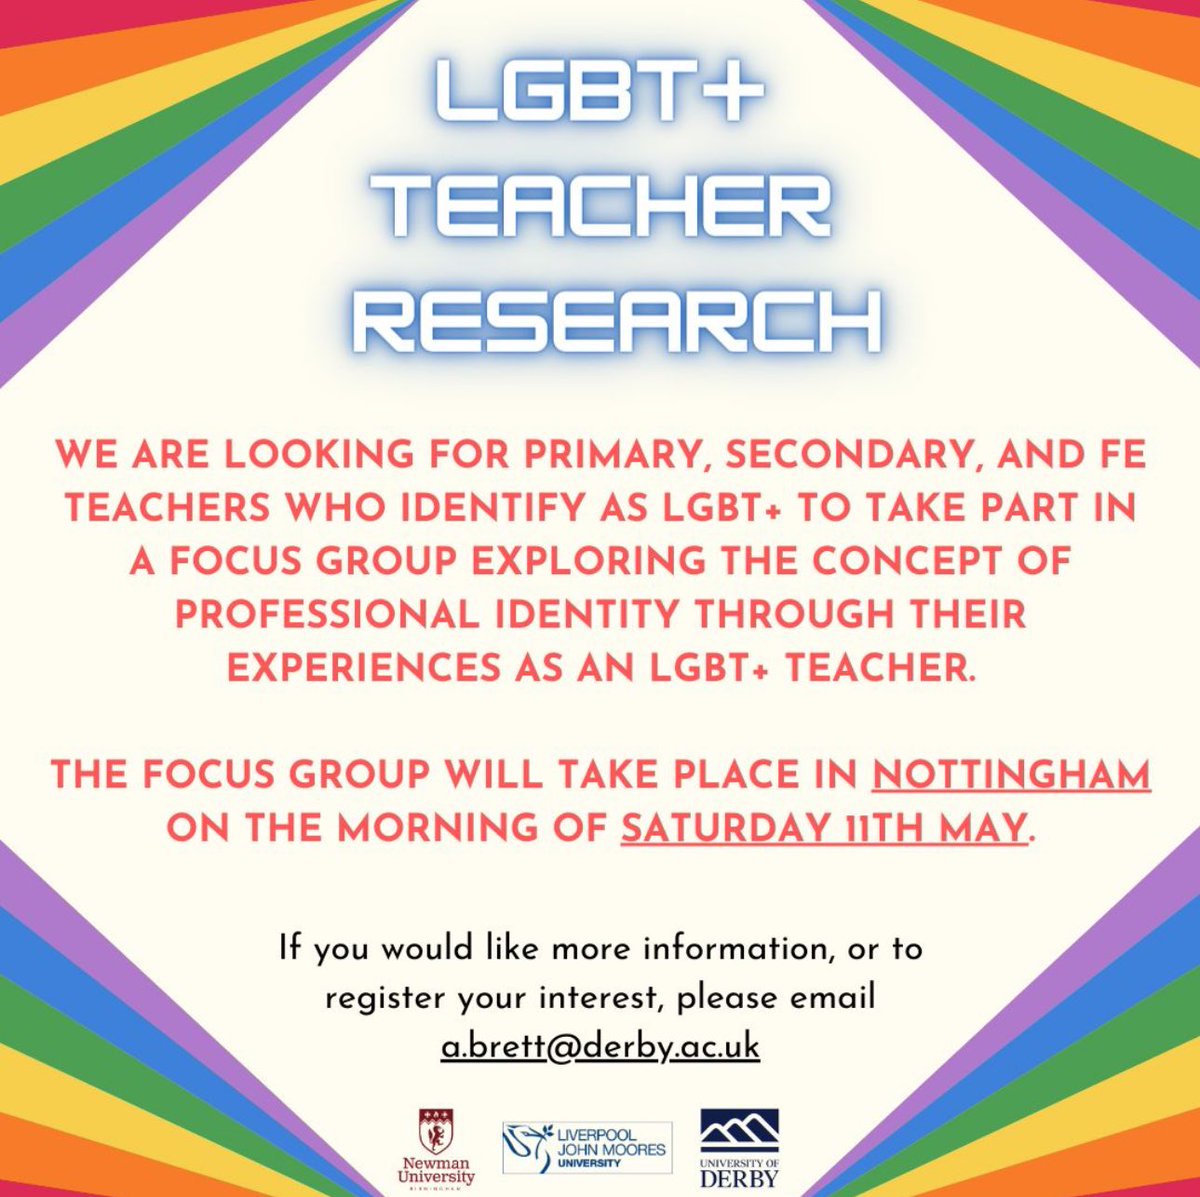 Please get in touch if you’re interested in taking part in some research between Liverpool John Moores University, Birmingham Newman University and the University of Derby! ✨ @AislingCulshaw @DrAdamBrett #LGBTQ #Research